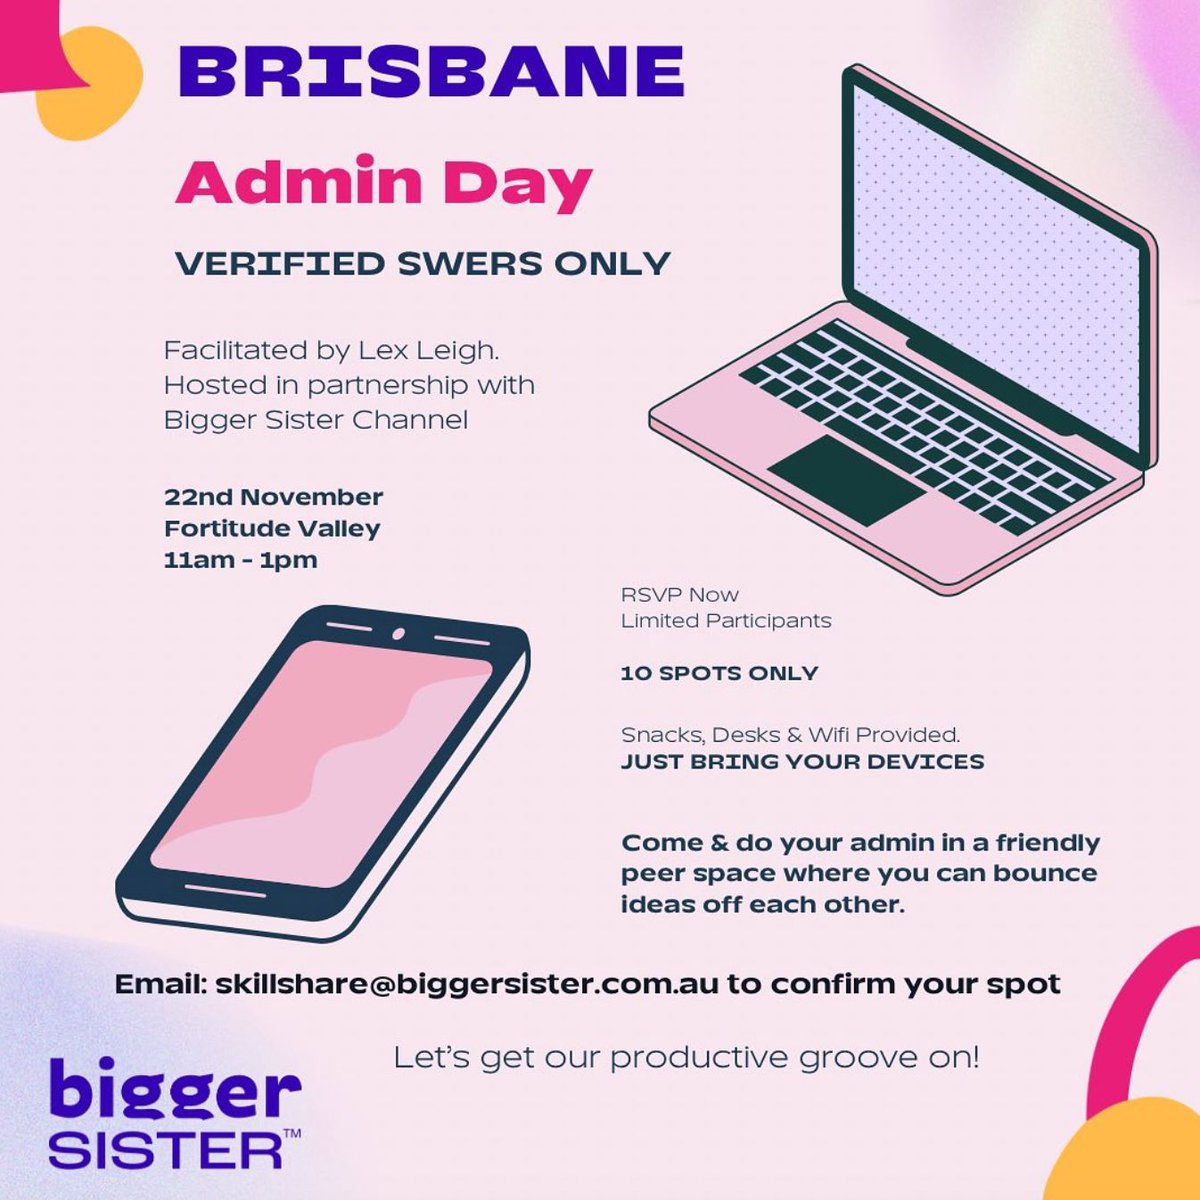 Join us in Brisbane for our inaugural admin day in just 2 days! 
Bring your devices and conquer your bookkeeping and administrative tasks alongside like-minded peers. Contact us via email at skillshare@biggersisterchannel.com.au. 
#AdminDay #Brisbane